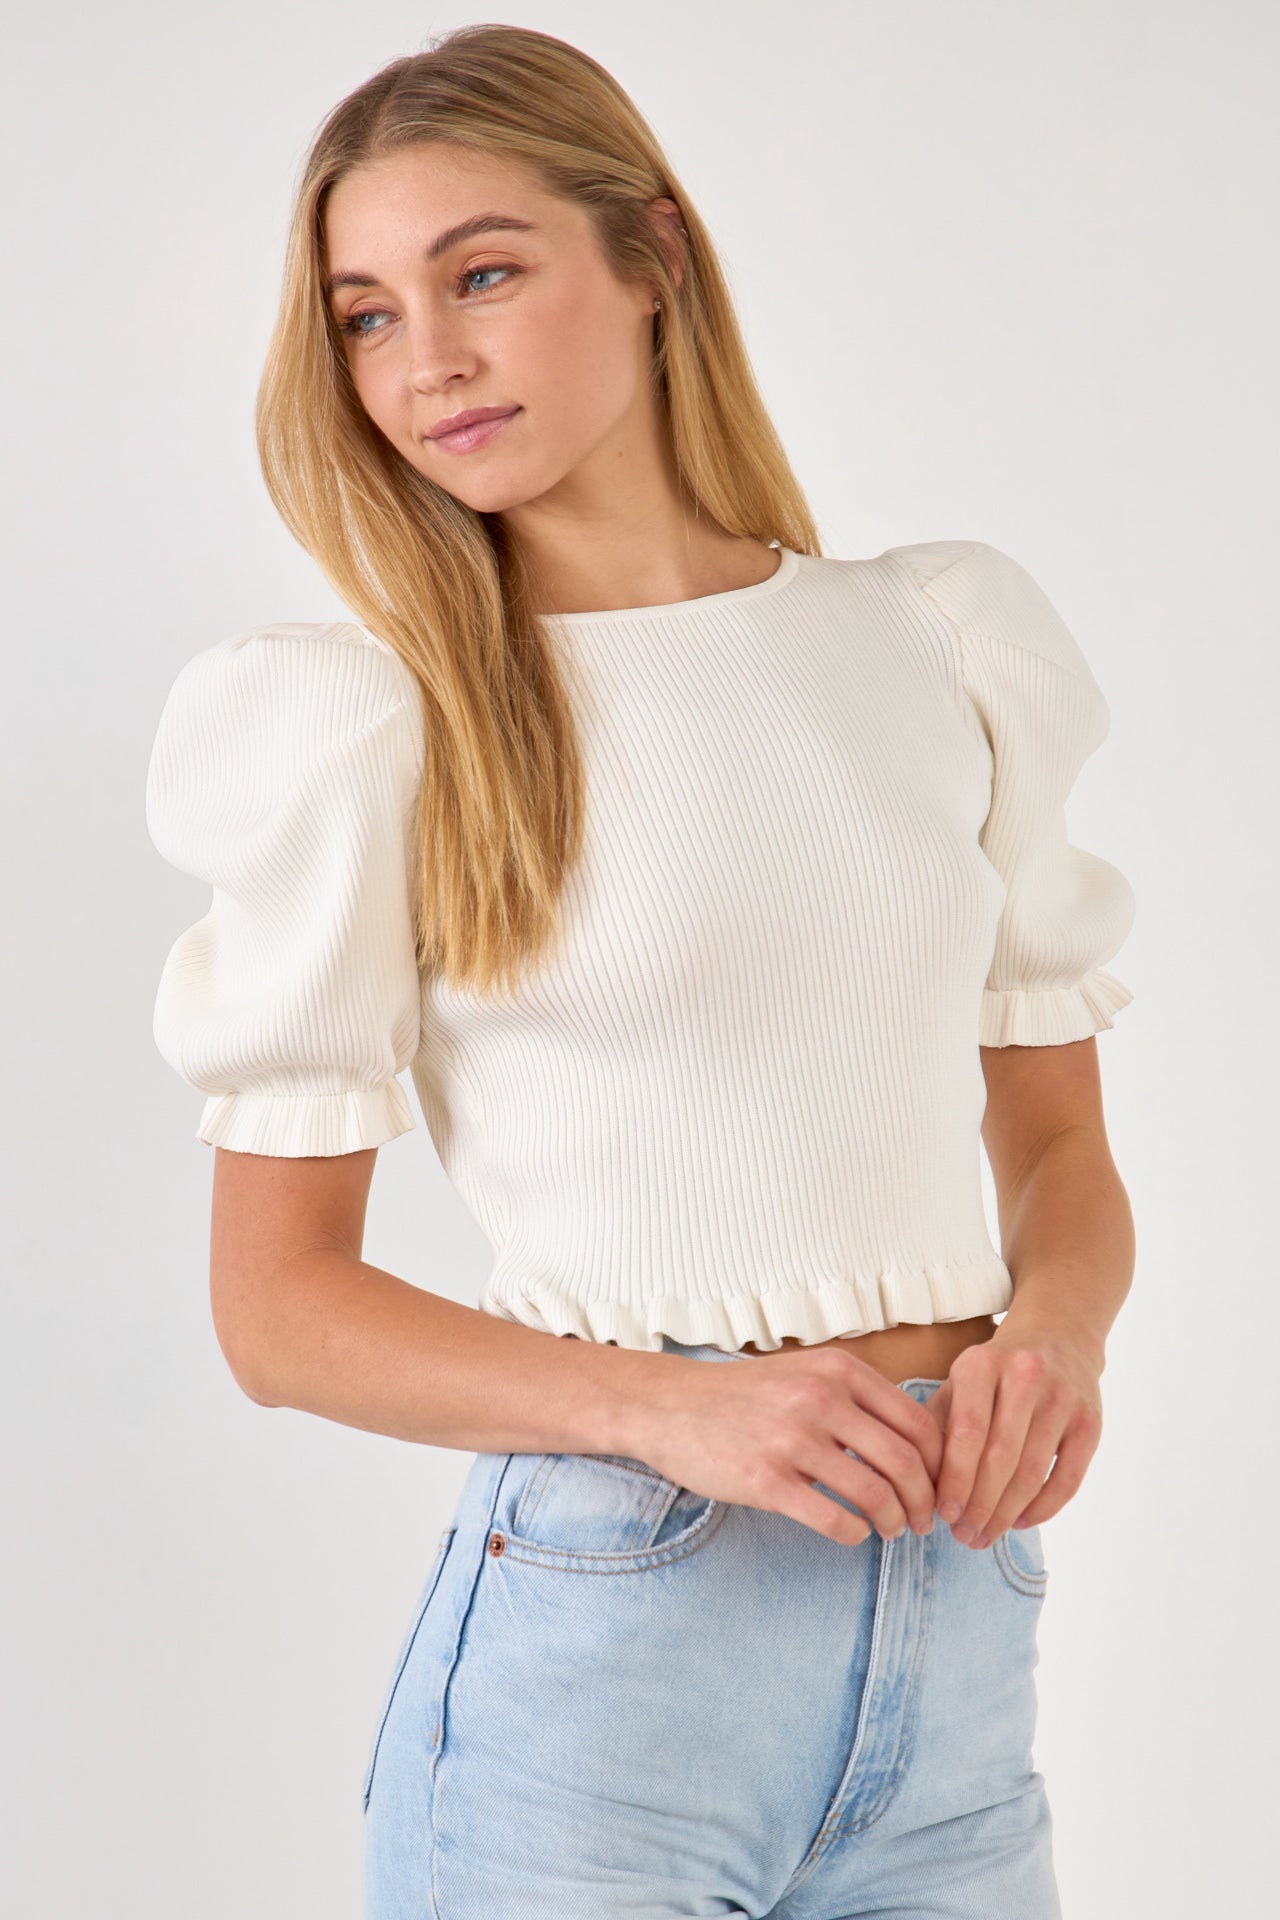 ENDLESS ROSE - Back Tied Straps Knit Top - SWEATERS & KNITS available at Objectrare